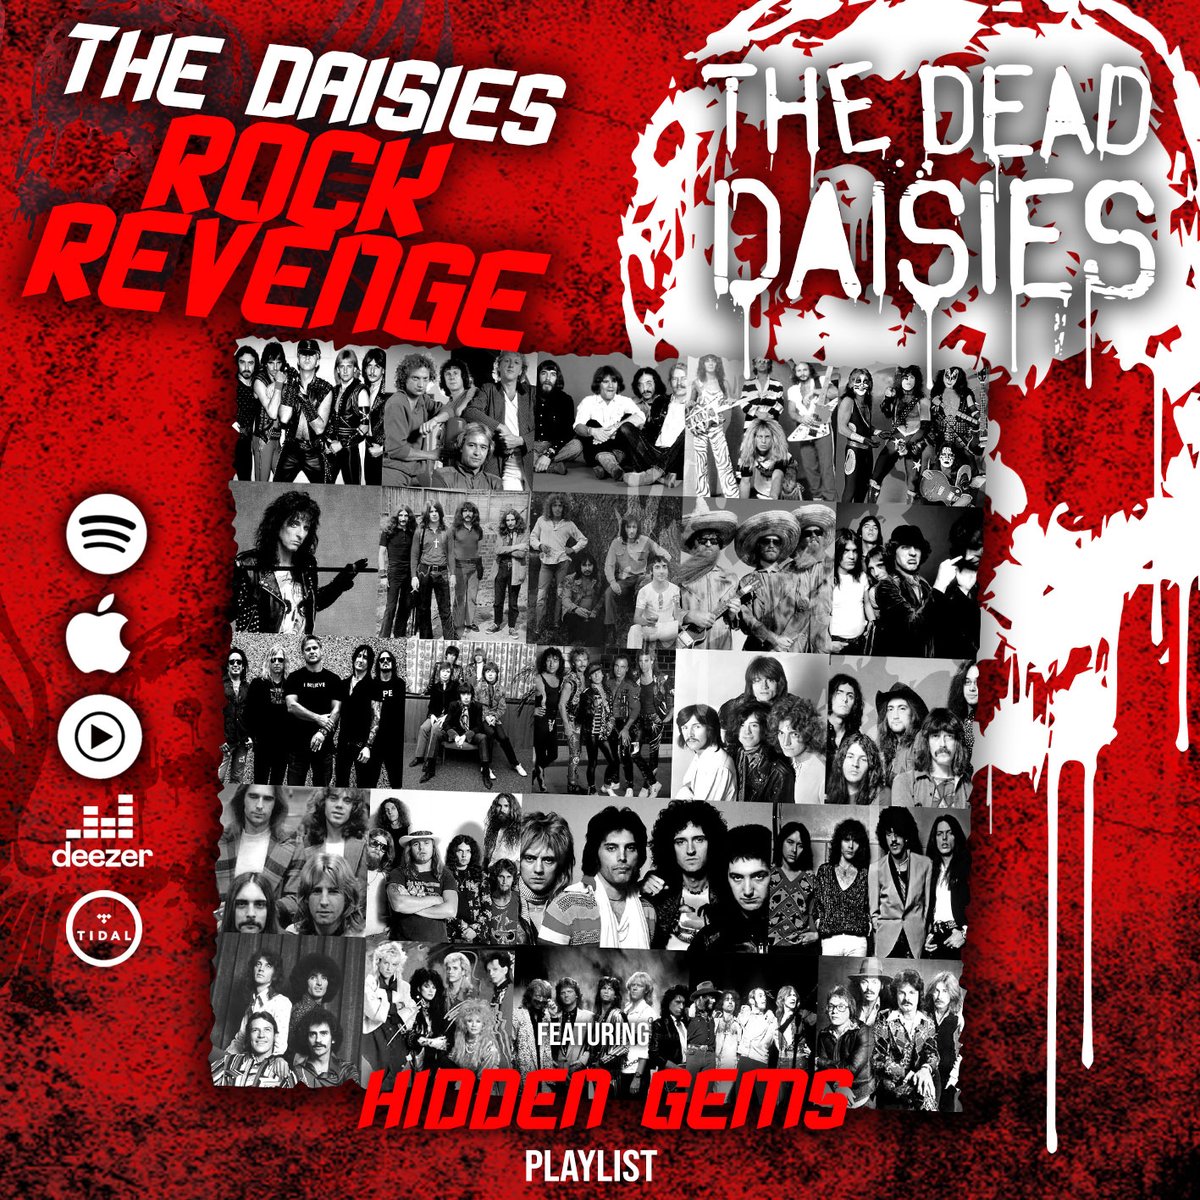 This weekend for your streaming pleasure we’ve pulled together some crowd favourites and hidden gems from some of the world’s greatest rock bands!🚀🚀 Have a good one & turn it up!!😎 thedeaddaisies.com/daisies-rock-r… #TheDeadDaisies #TheDaisiesRockRevenge #HiddenGems #Playlist #Spotify…